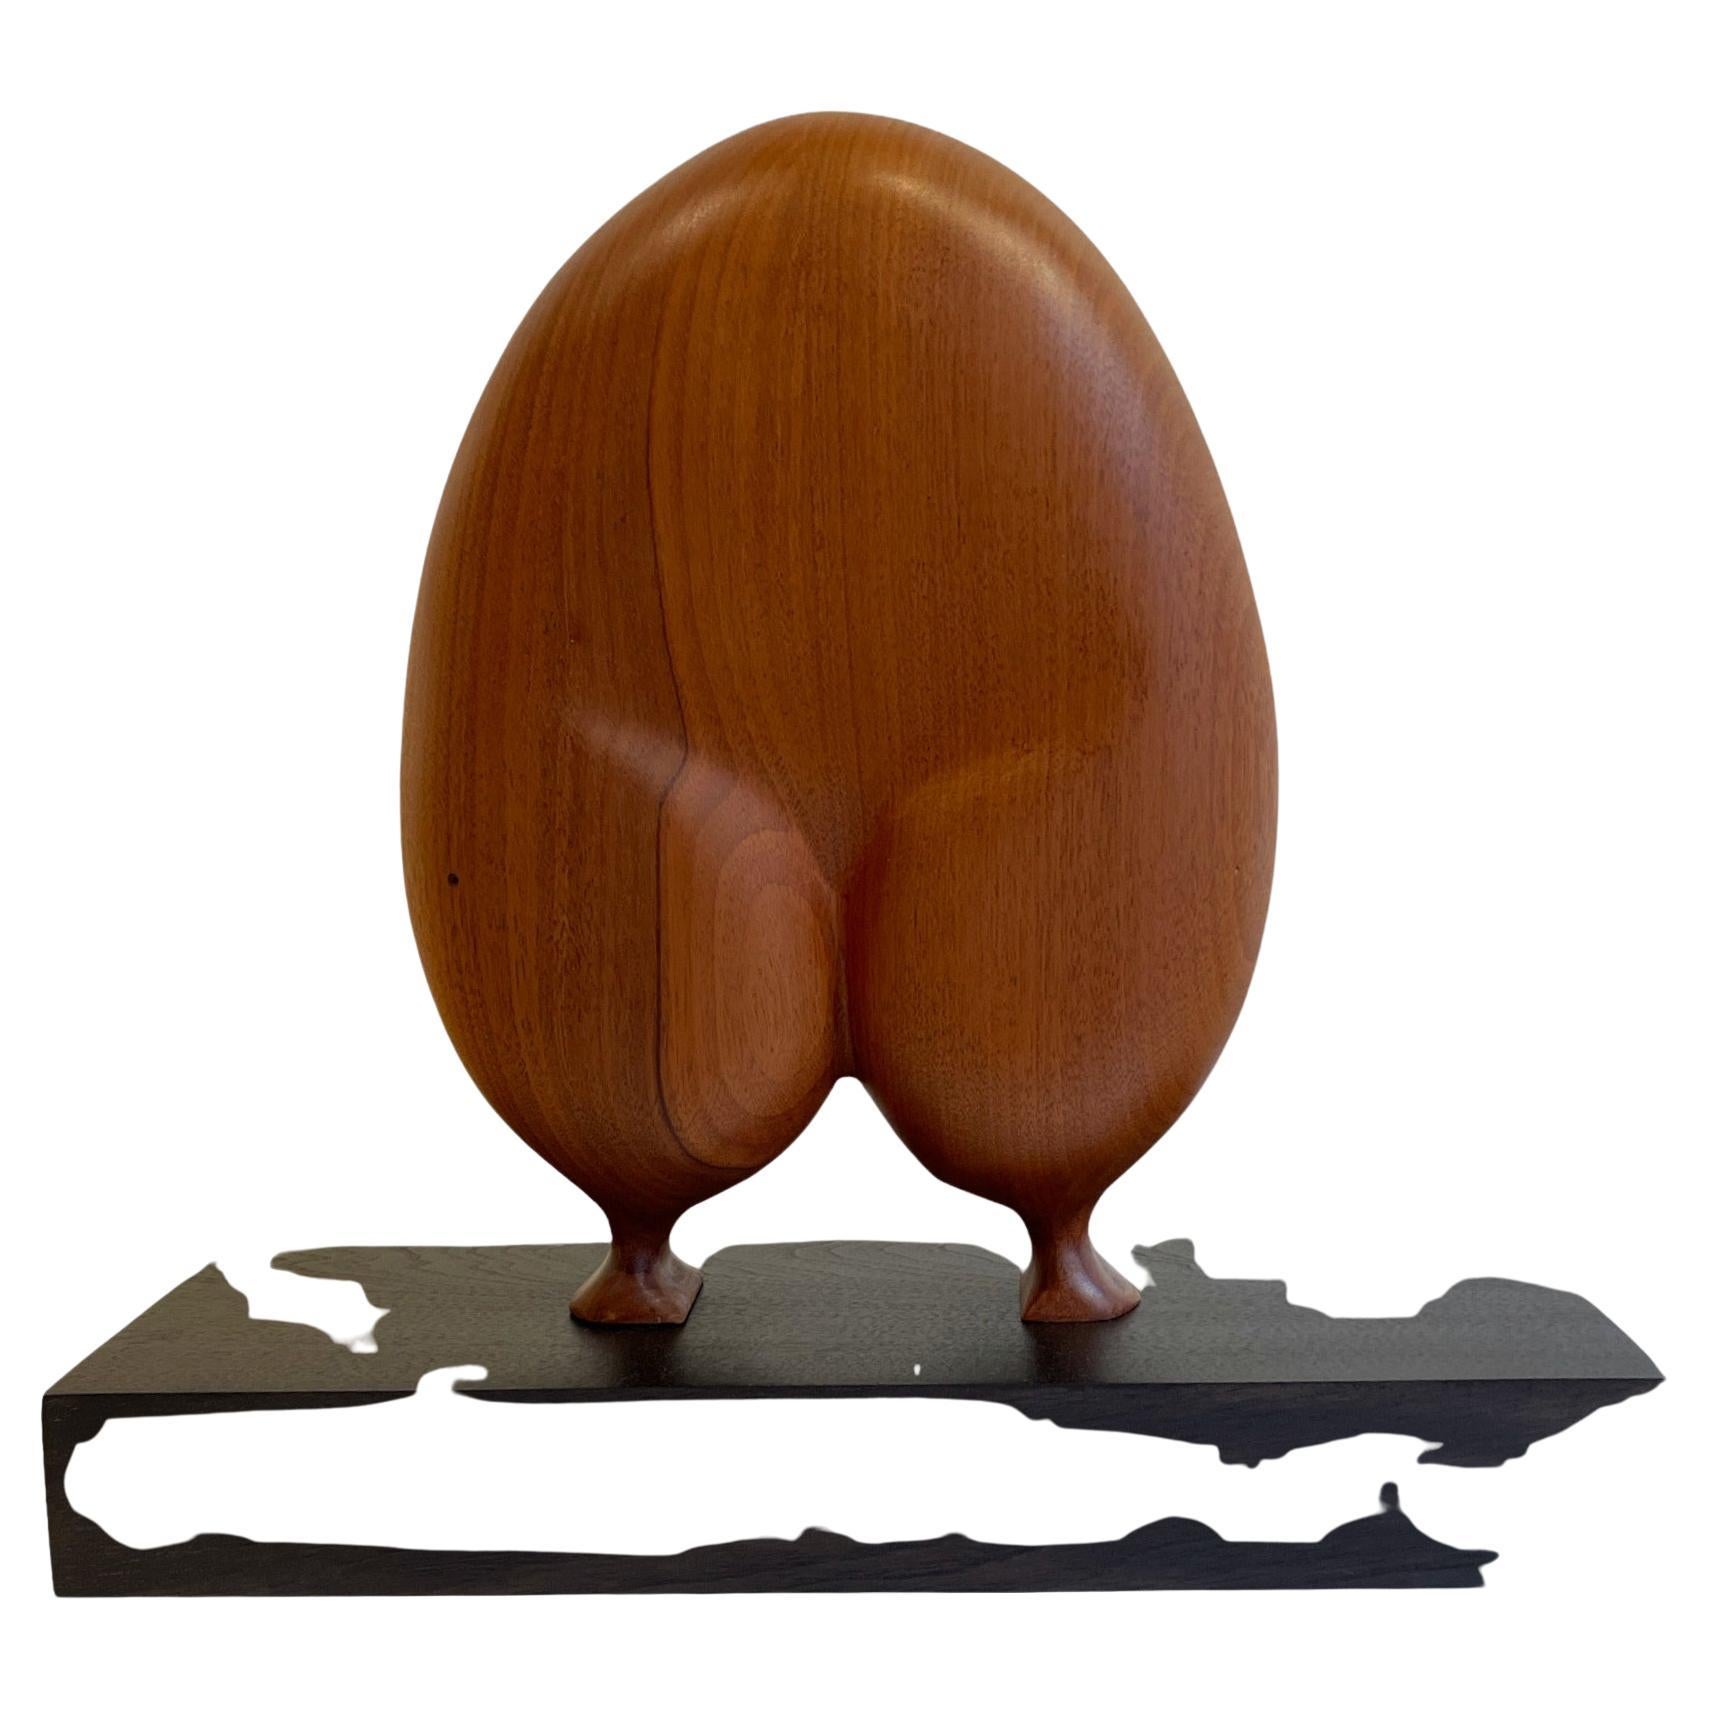 Mahogany is an all time favorite for fine wooden furniture. It is the benchmark for stability, has a rich consistent color, and finishes beautifully. This beautiful wood gives this small sculpture a warm and appealing 360? aesthetic. The sculpture